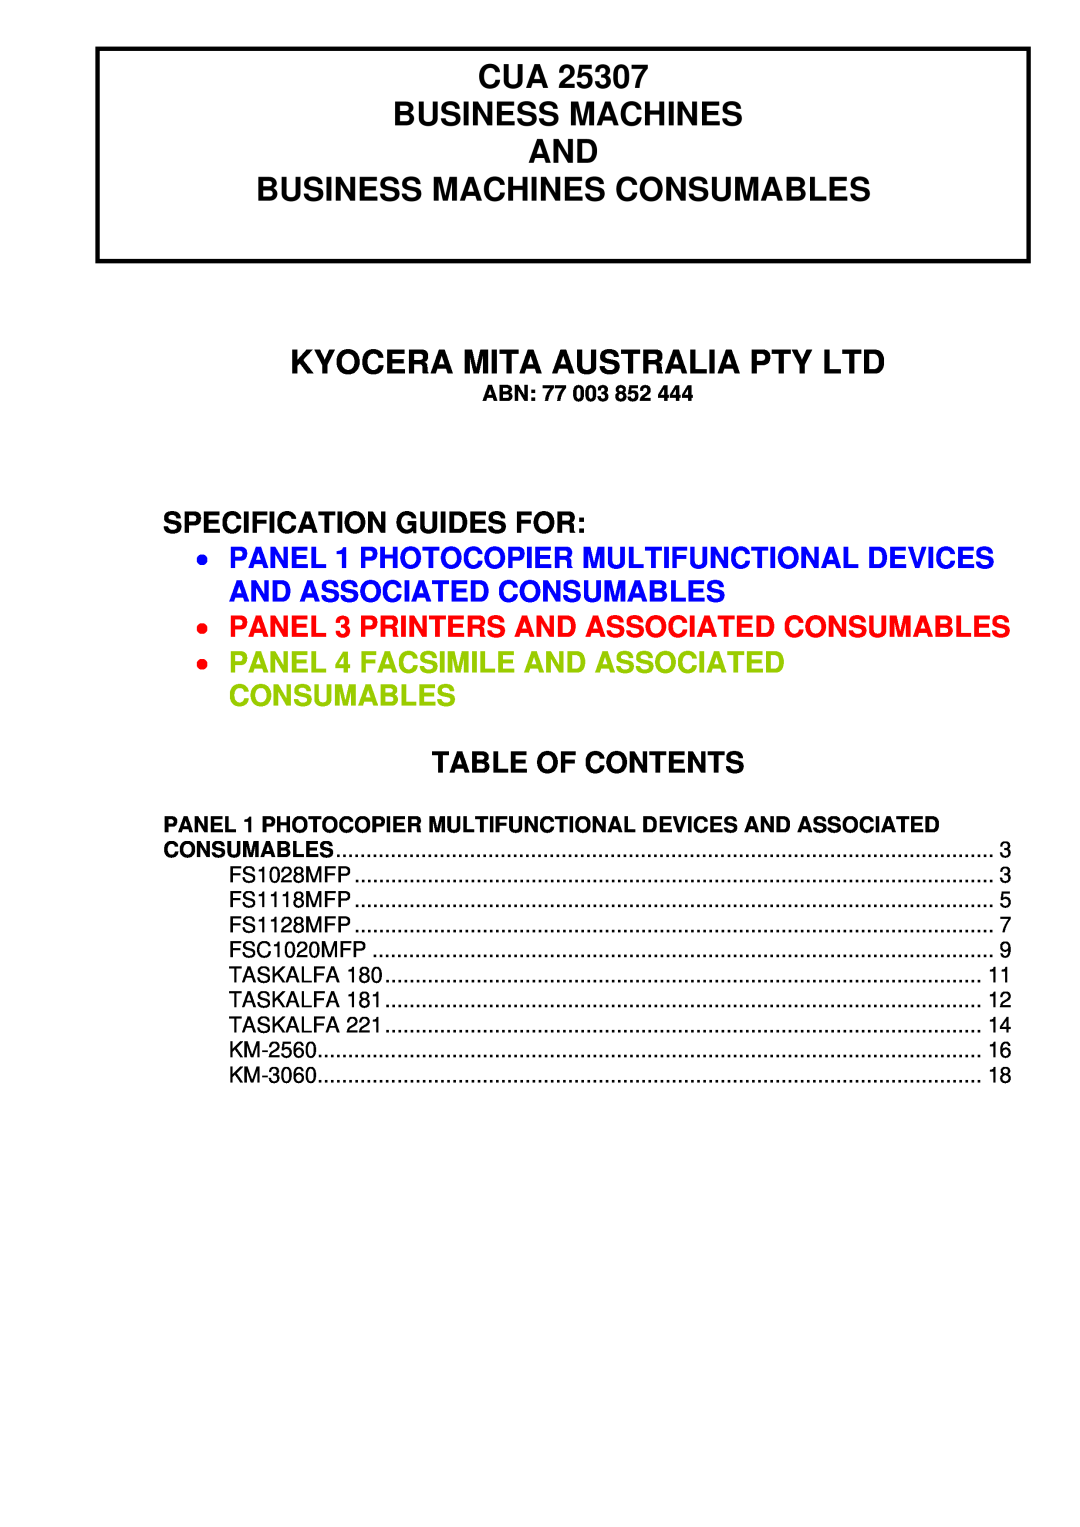 Kyocera CUA 25307 manual Specification Guides For, PANEL 3 PRINTERS AND ASSOCIATED CONSUMABLES, Table Of Contents, ABN 77 